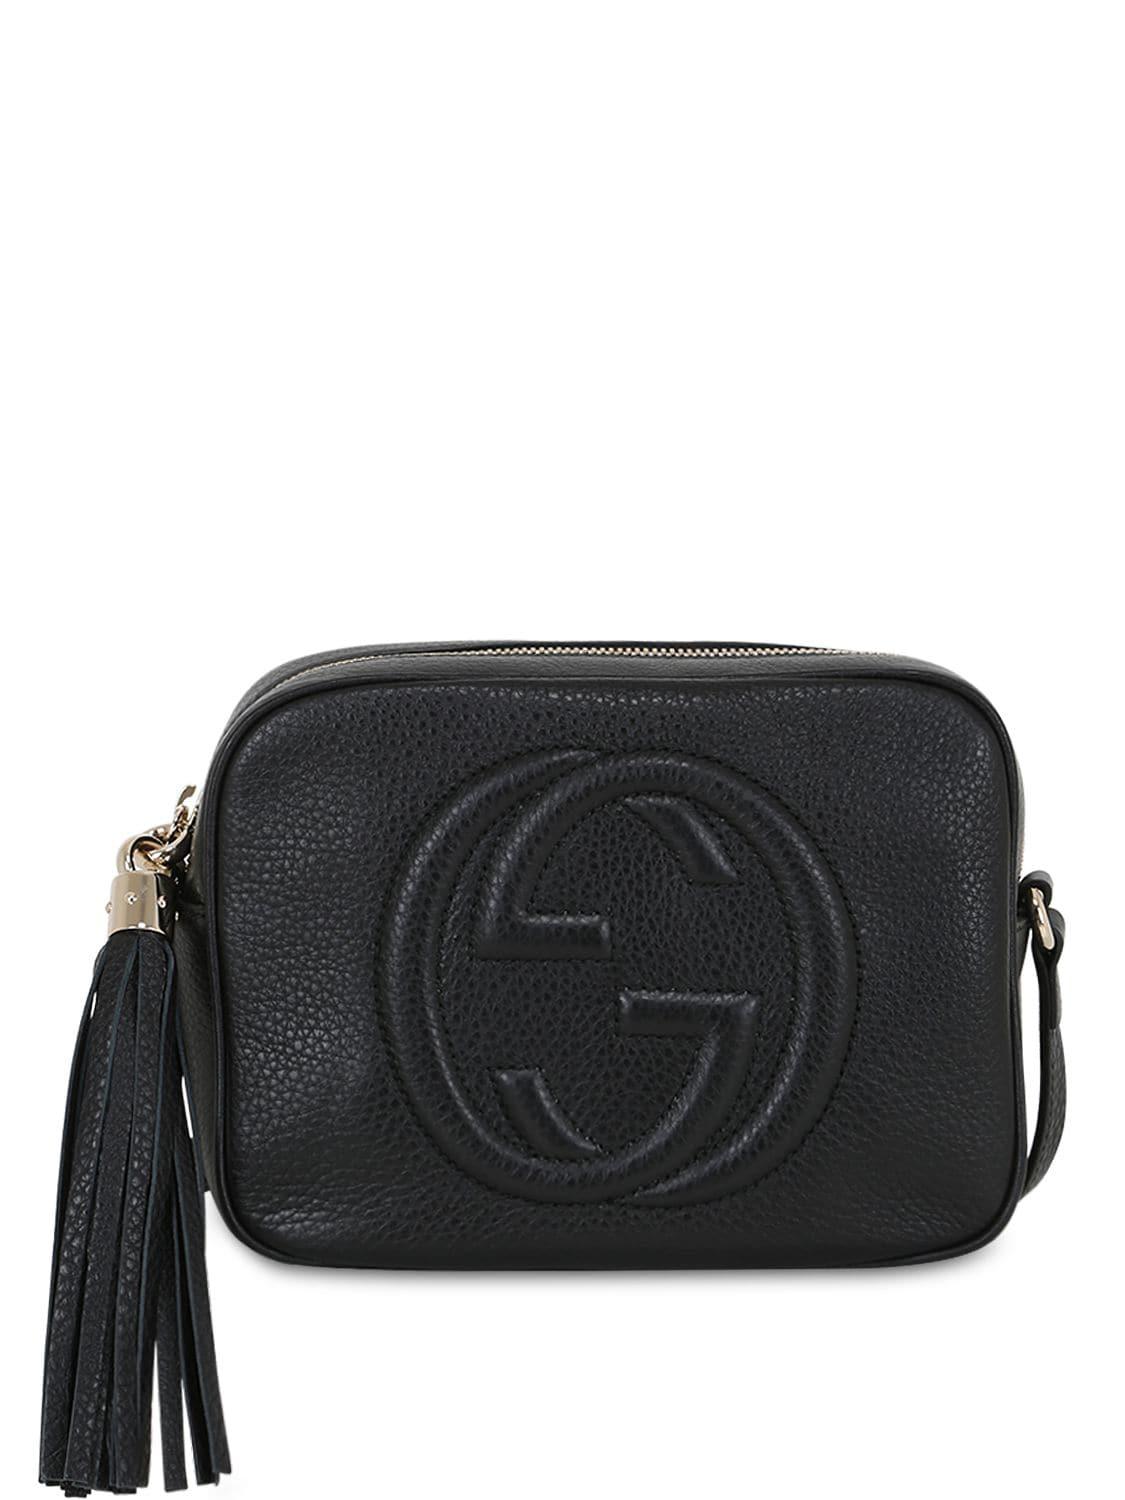 Gucci Soho Grained Leather Disco Bag in Black - Lyst